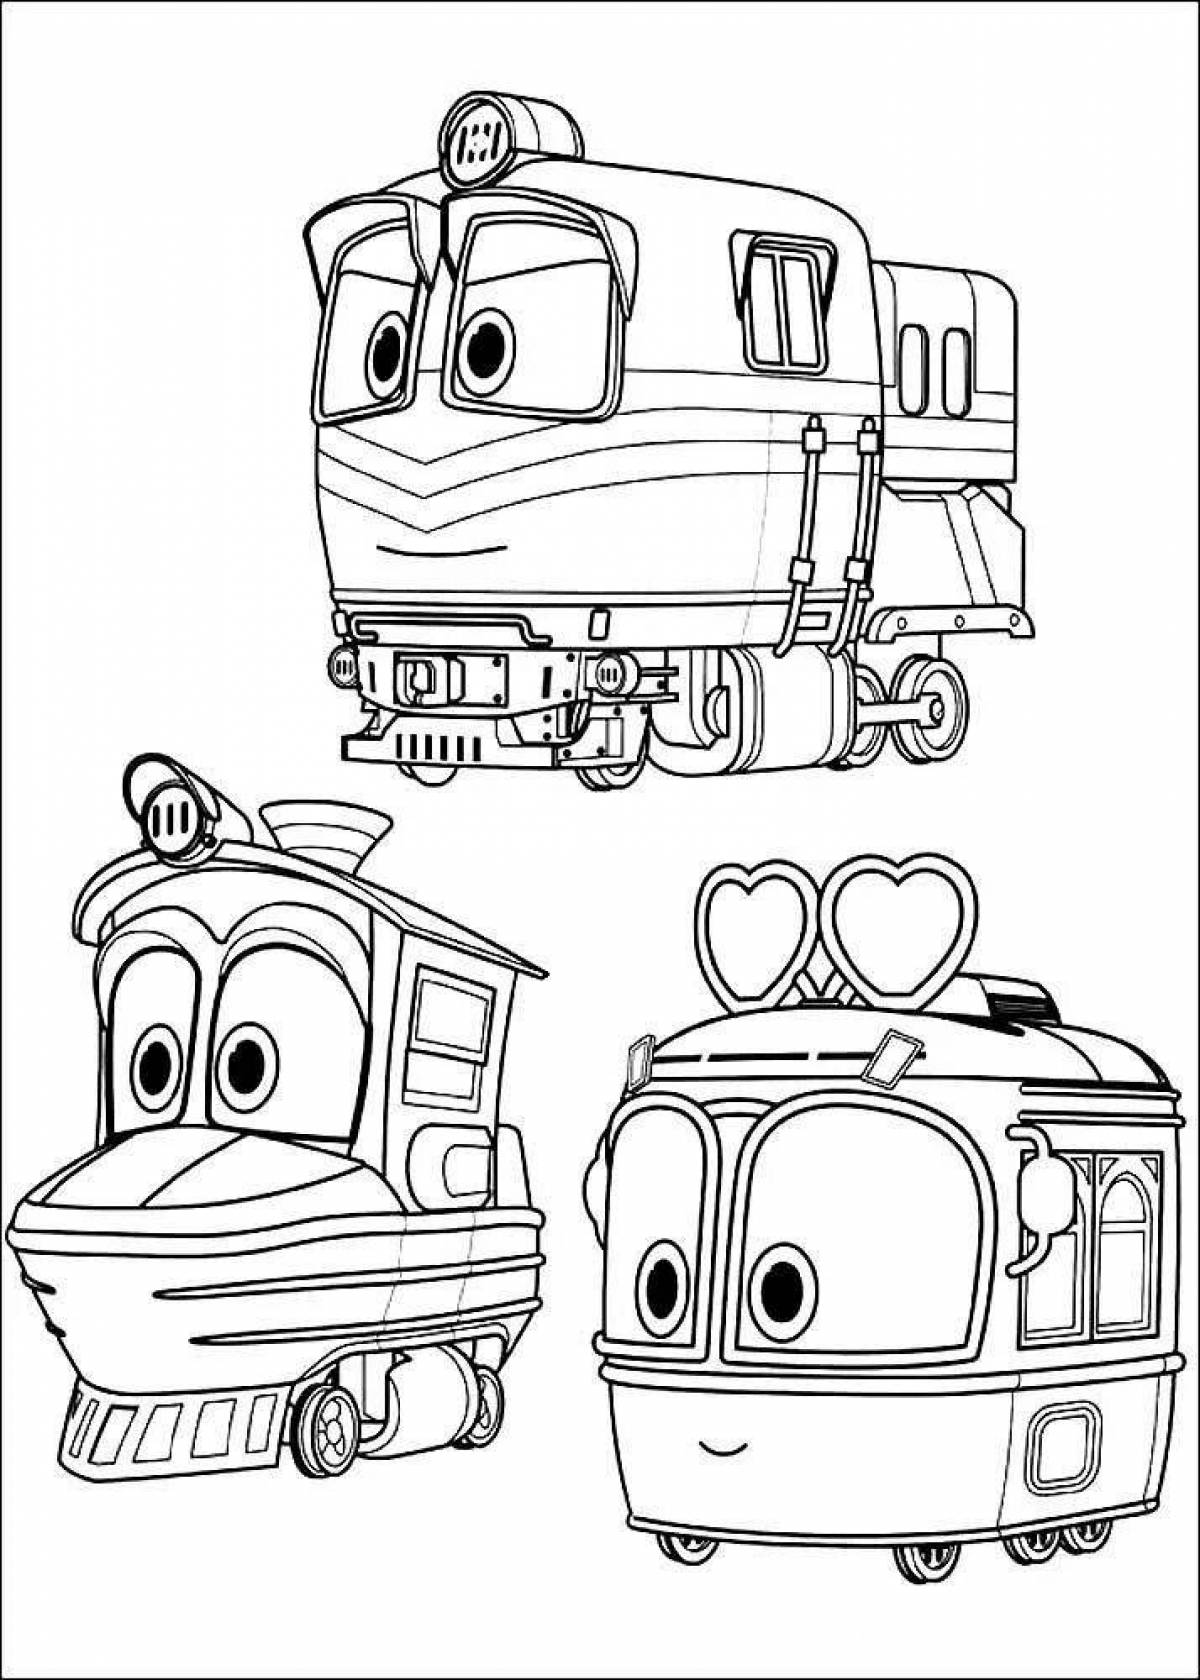 Lovely kay train robots coloring page